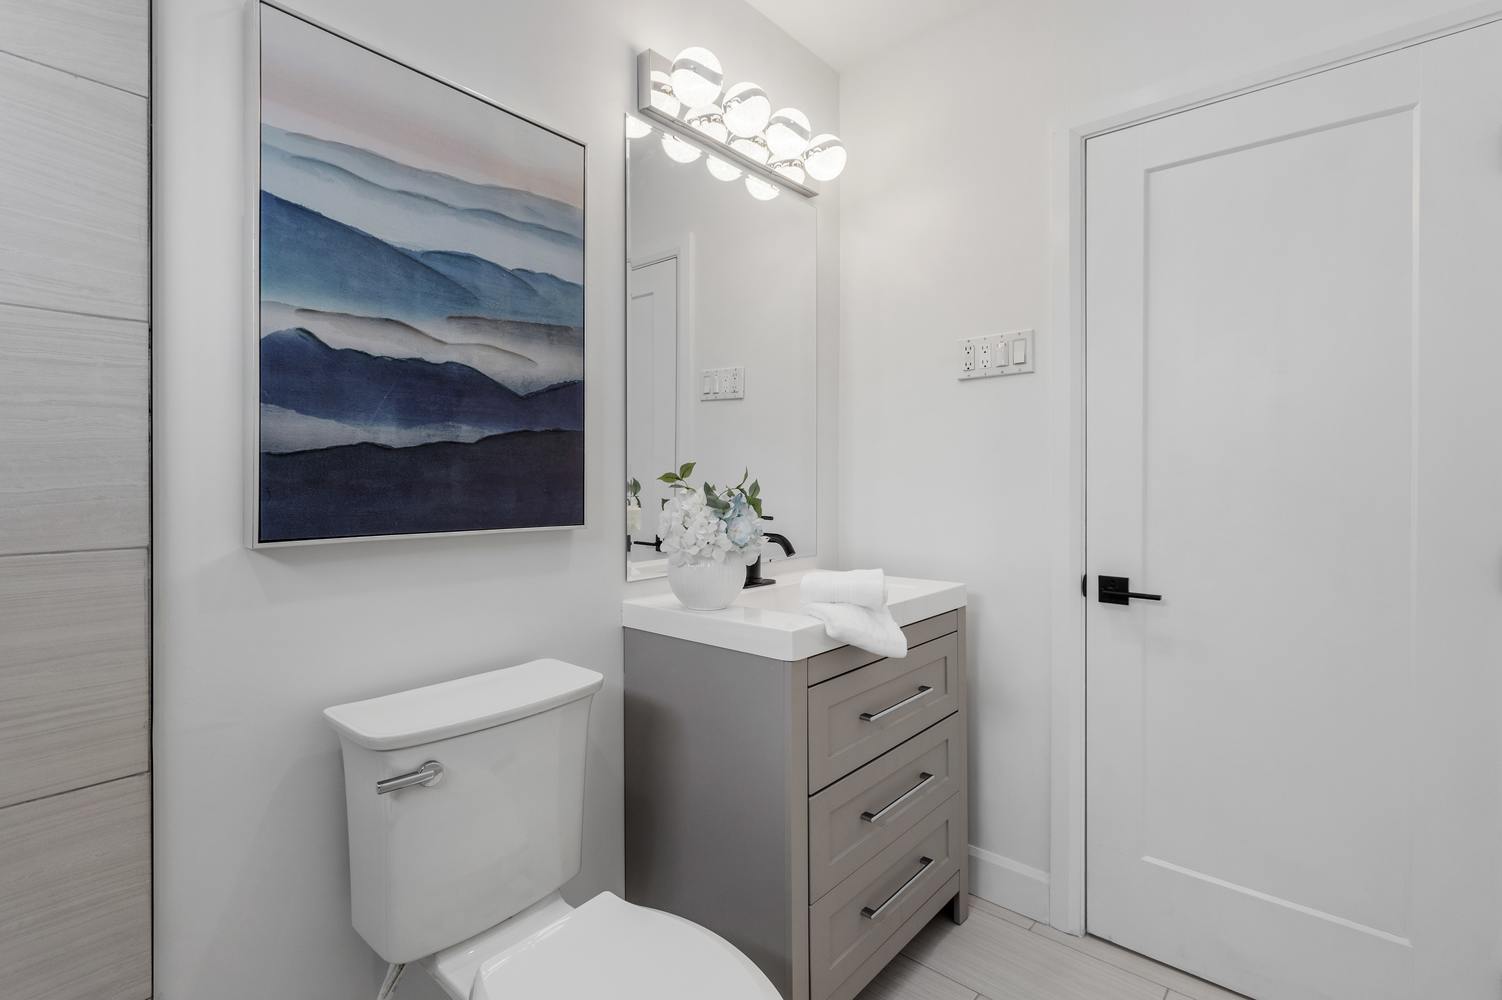 Tips for a Powder Room Renovation